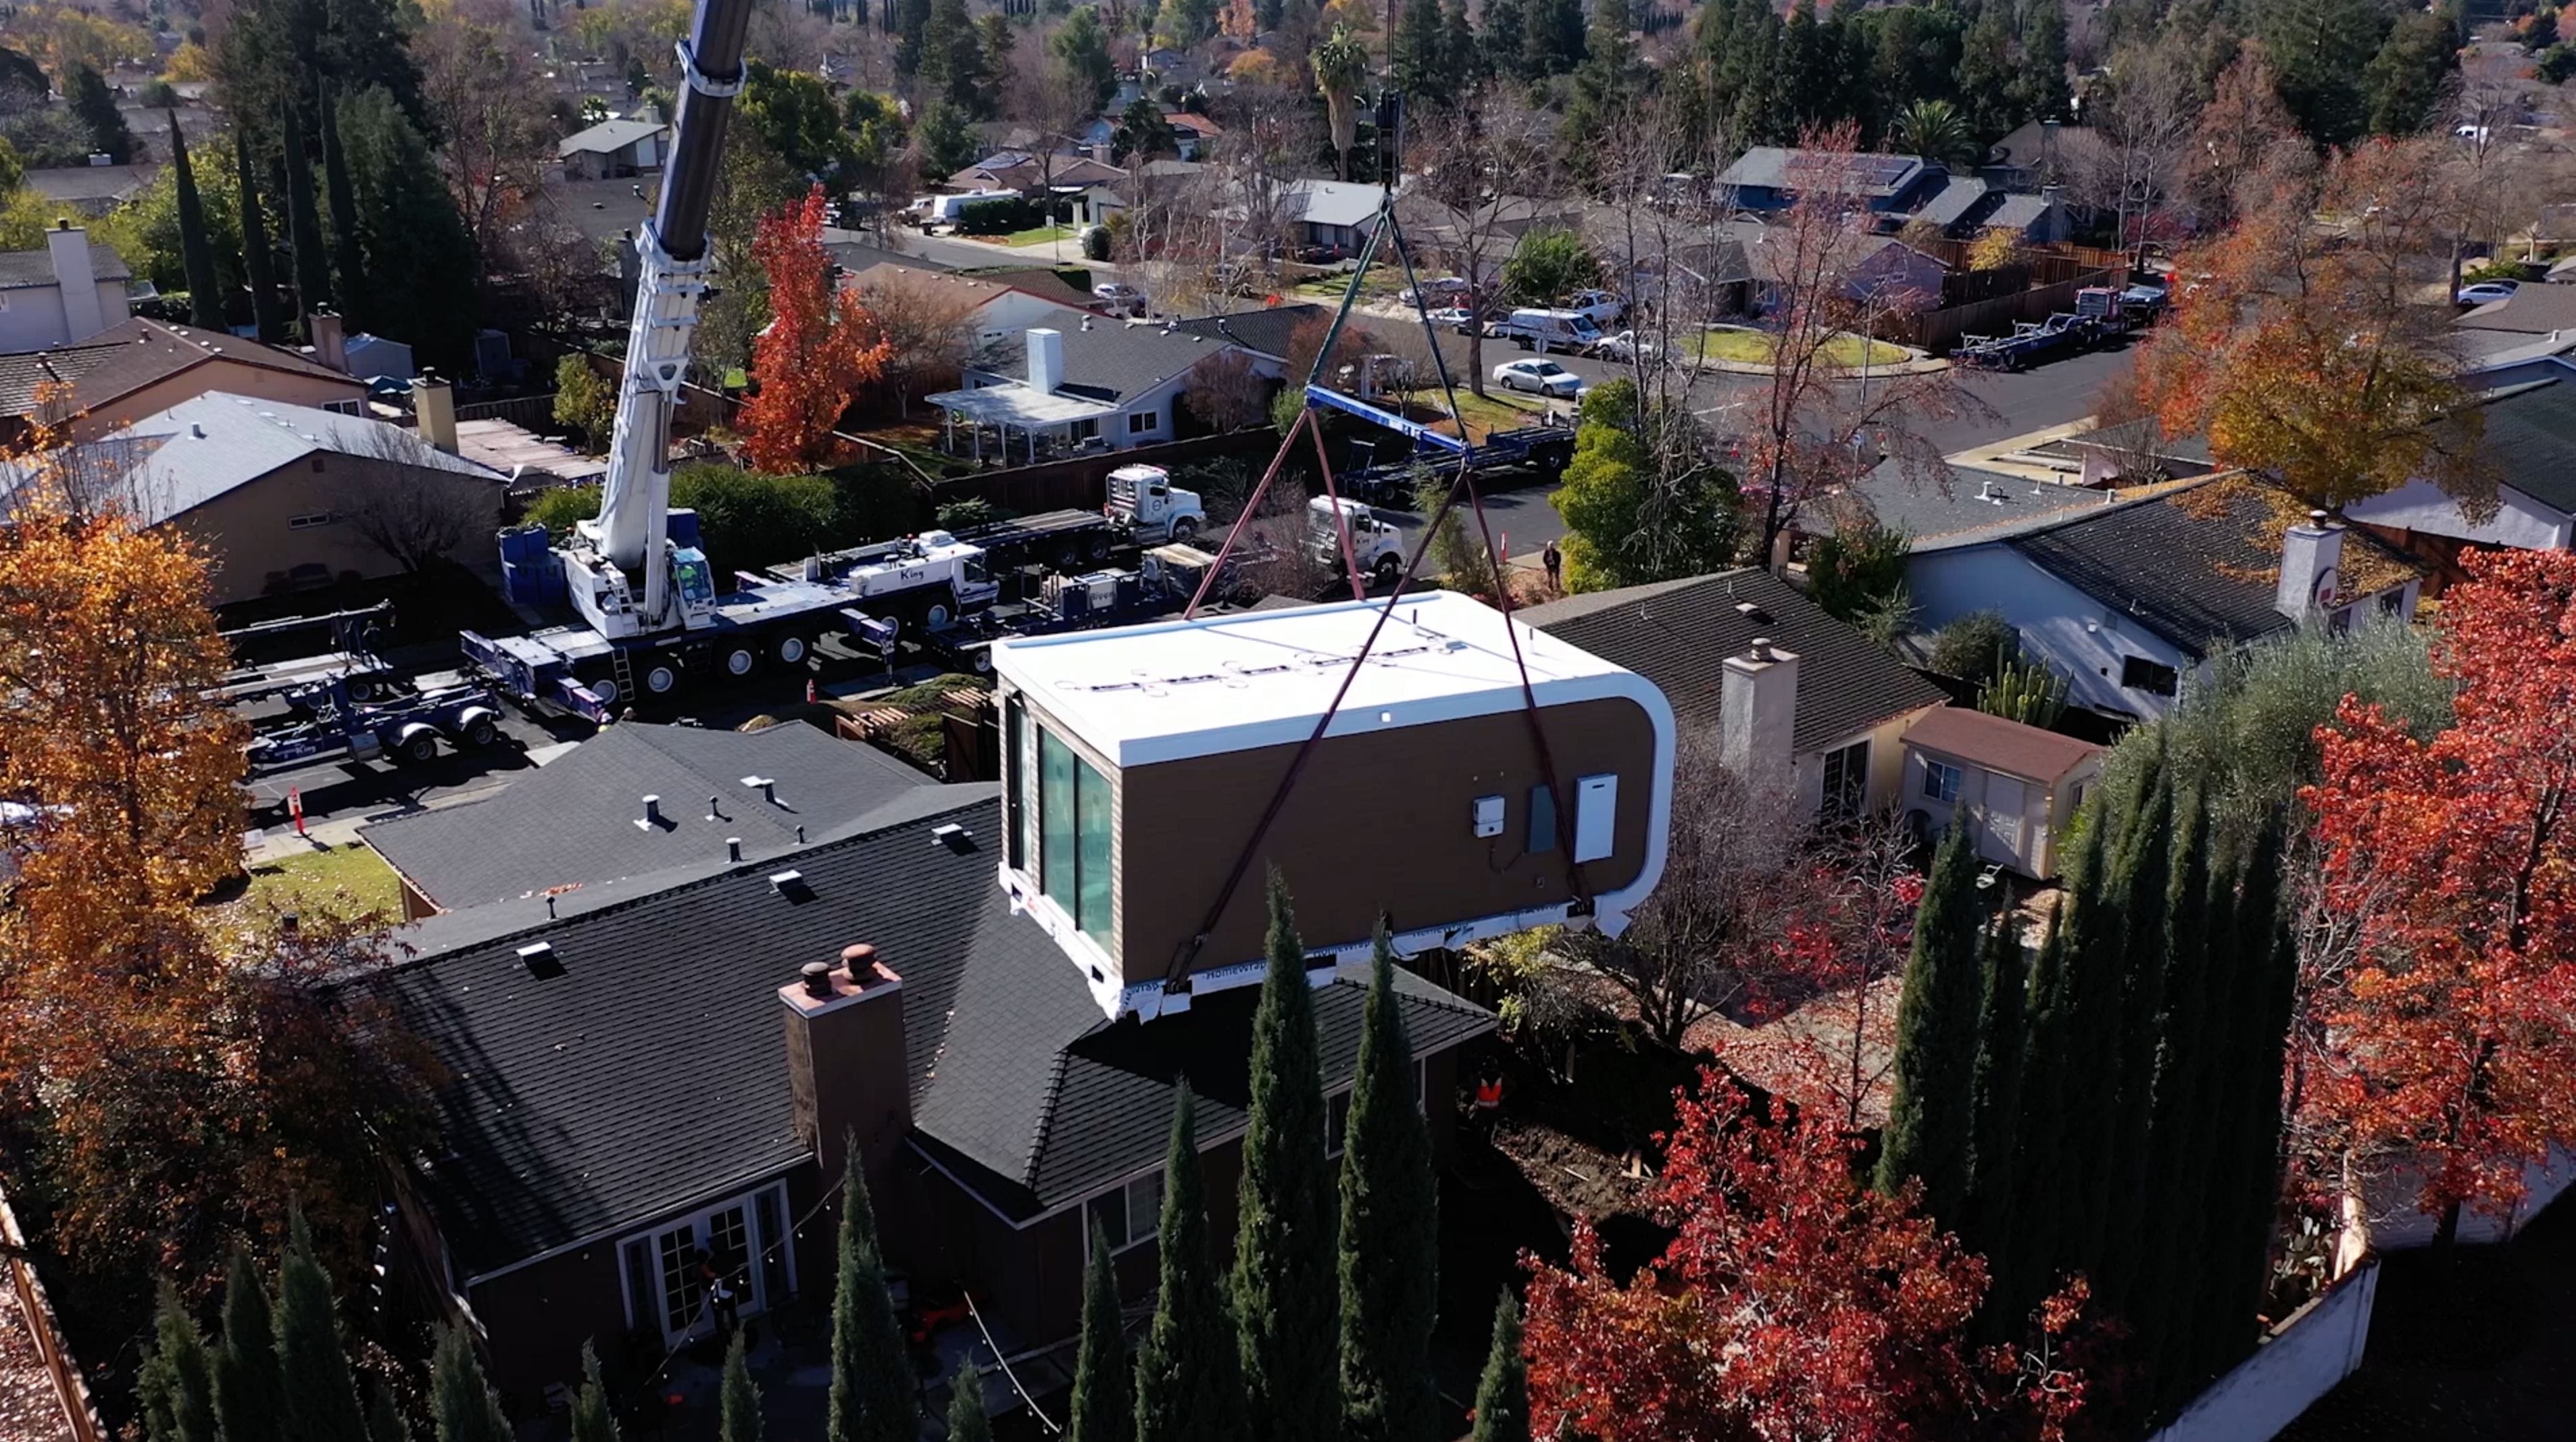 Mighty Buildings is 3D Printing Houses to Help Two Crises – Housing and the Environment